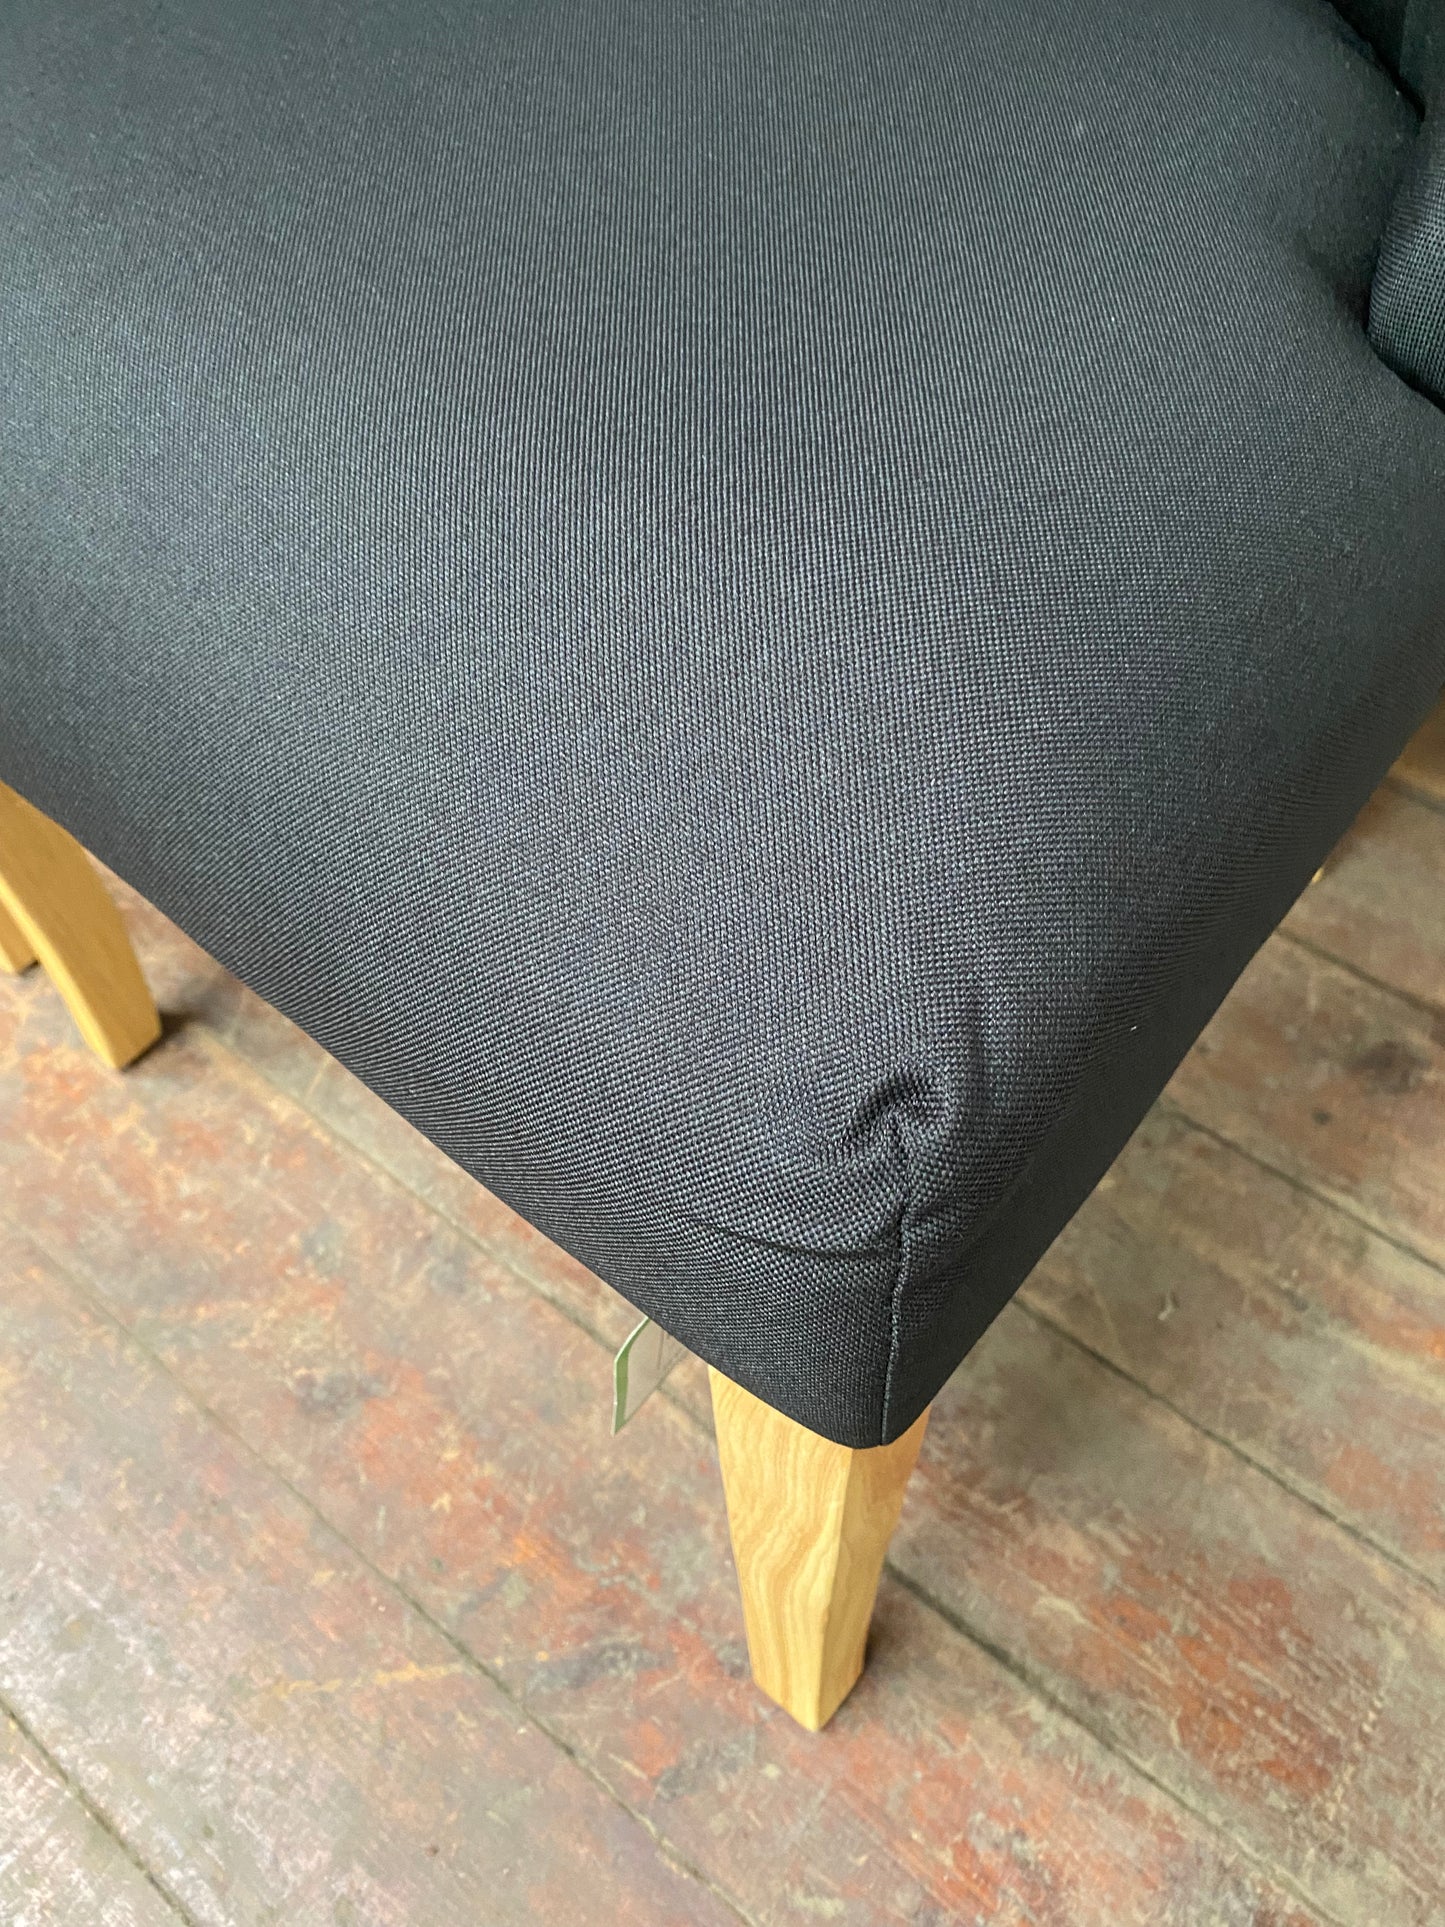 PAIR OF BLACK DINING CHAIRS (NEW)